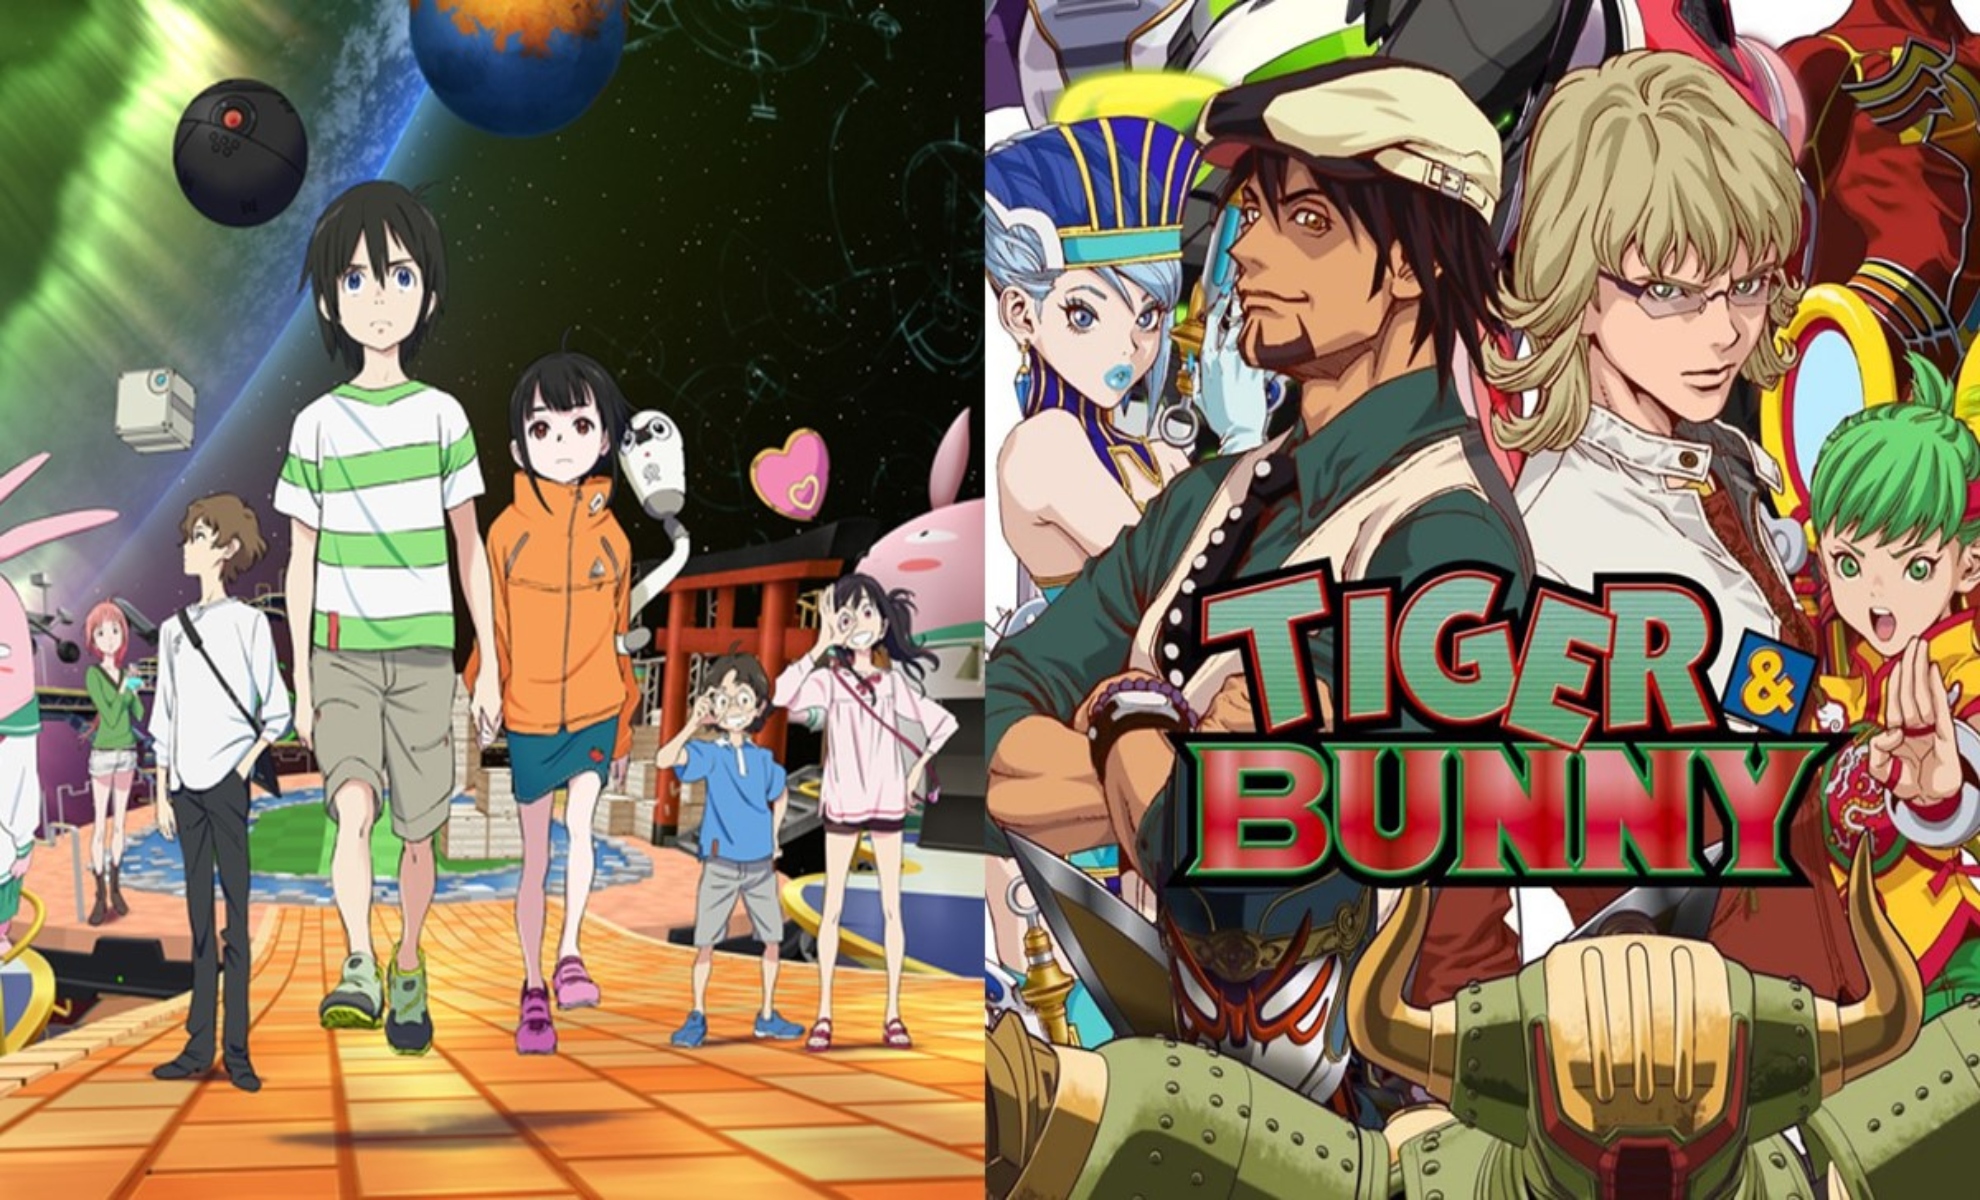 New trailers for The Orbital Children and Tiger & Bunny 2